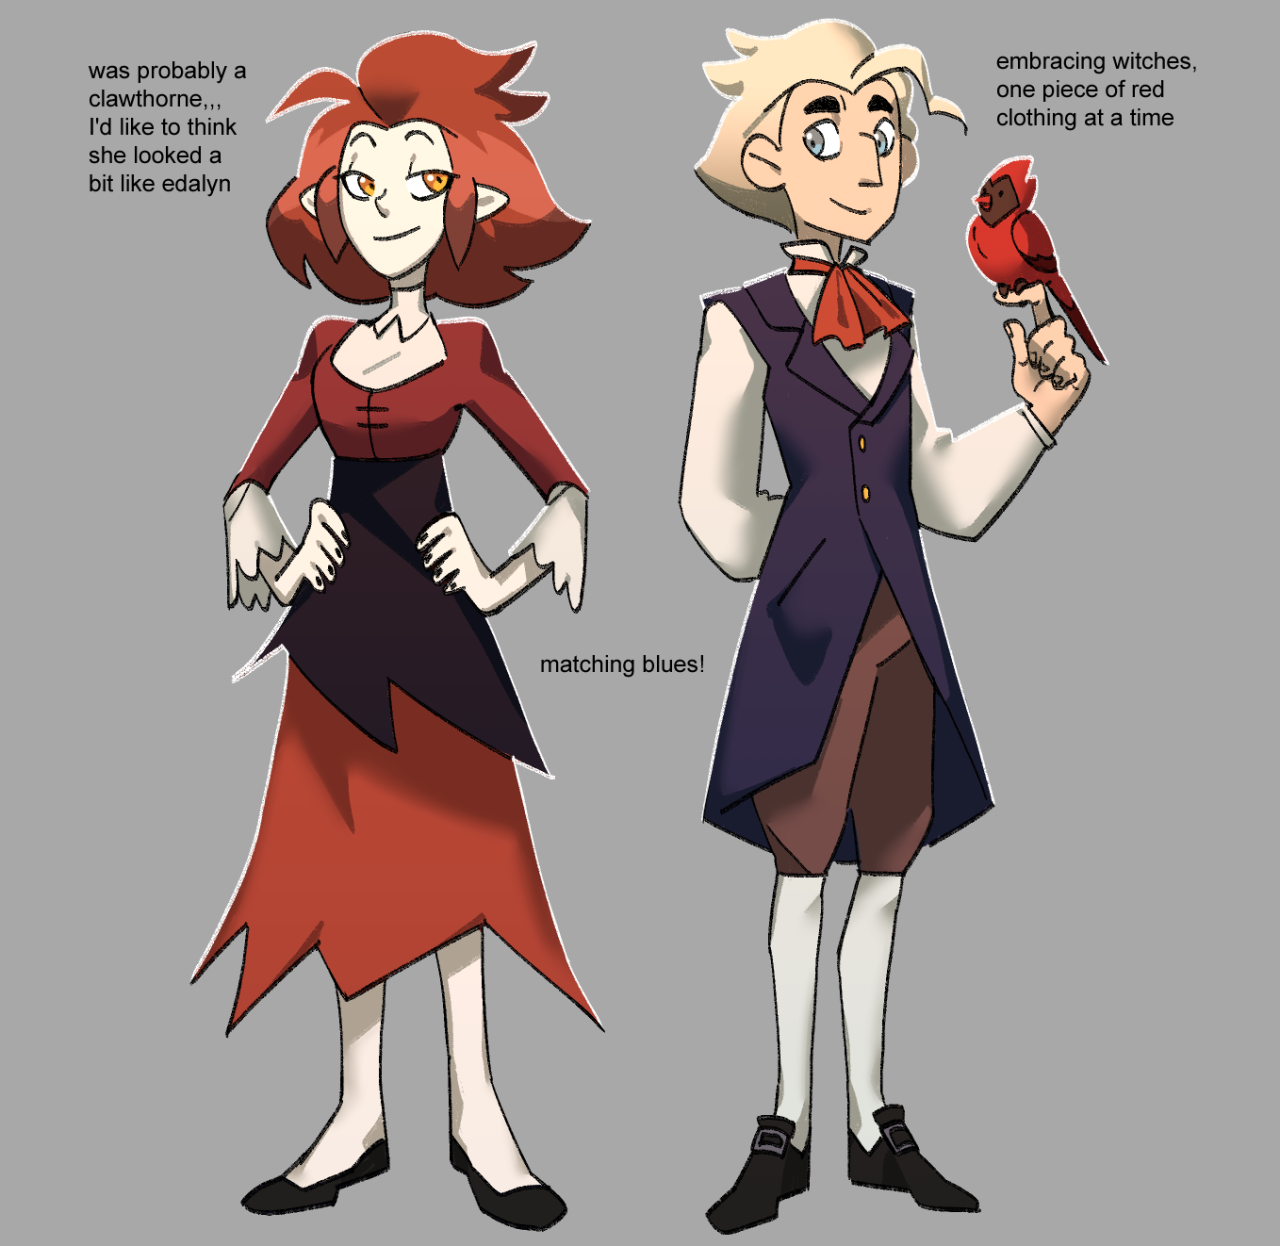 Fan Designs for Caleb and the witch (probably a Clawthorne) he